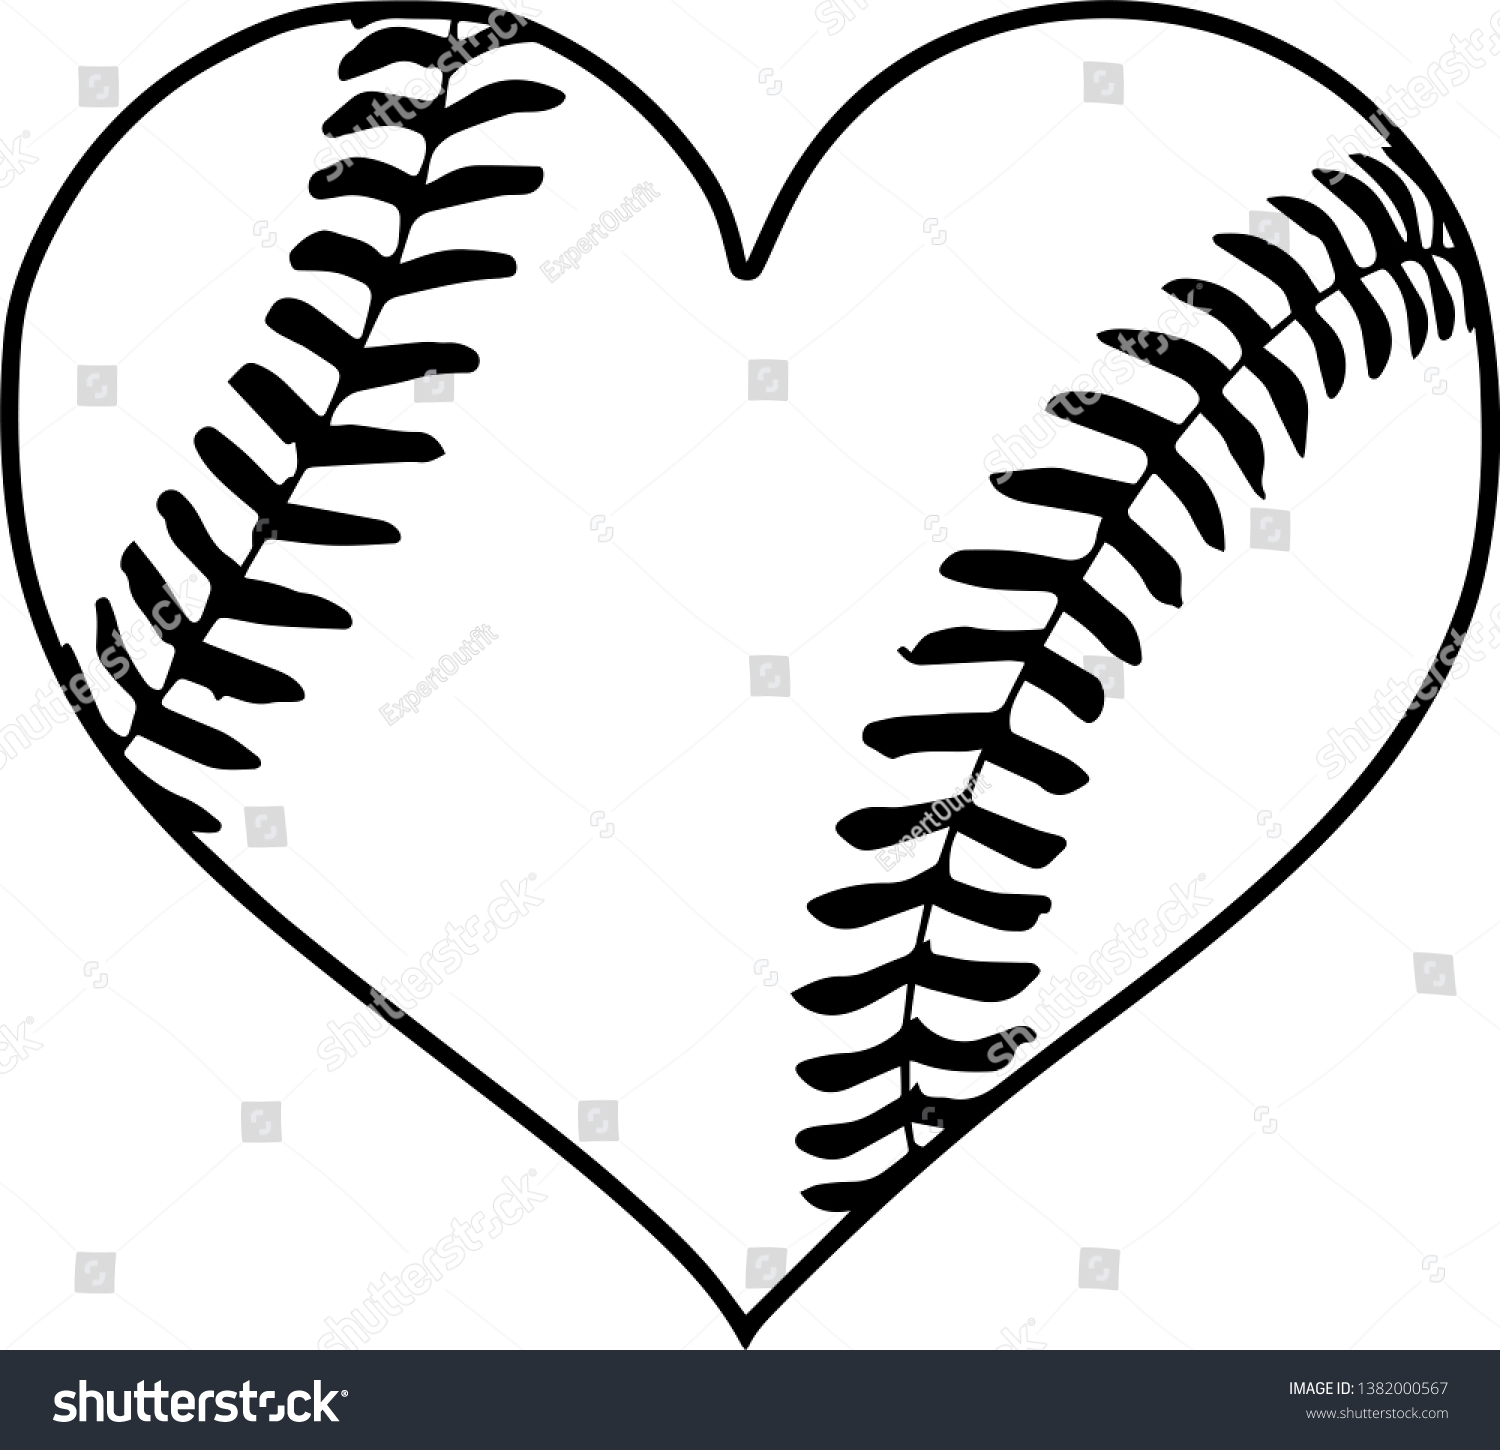 SVG of Baseball Shaped Like A Heart With Stitches svg